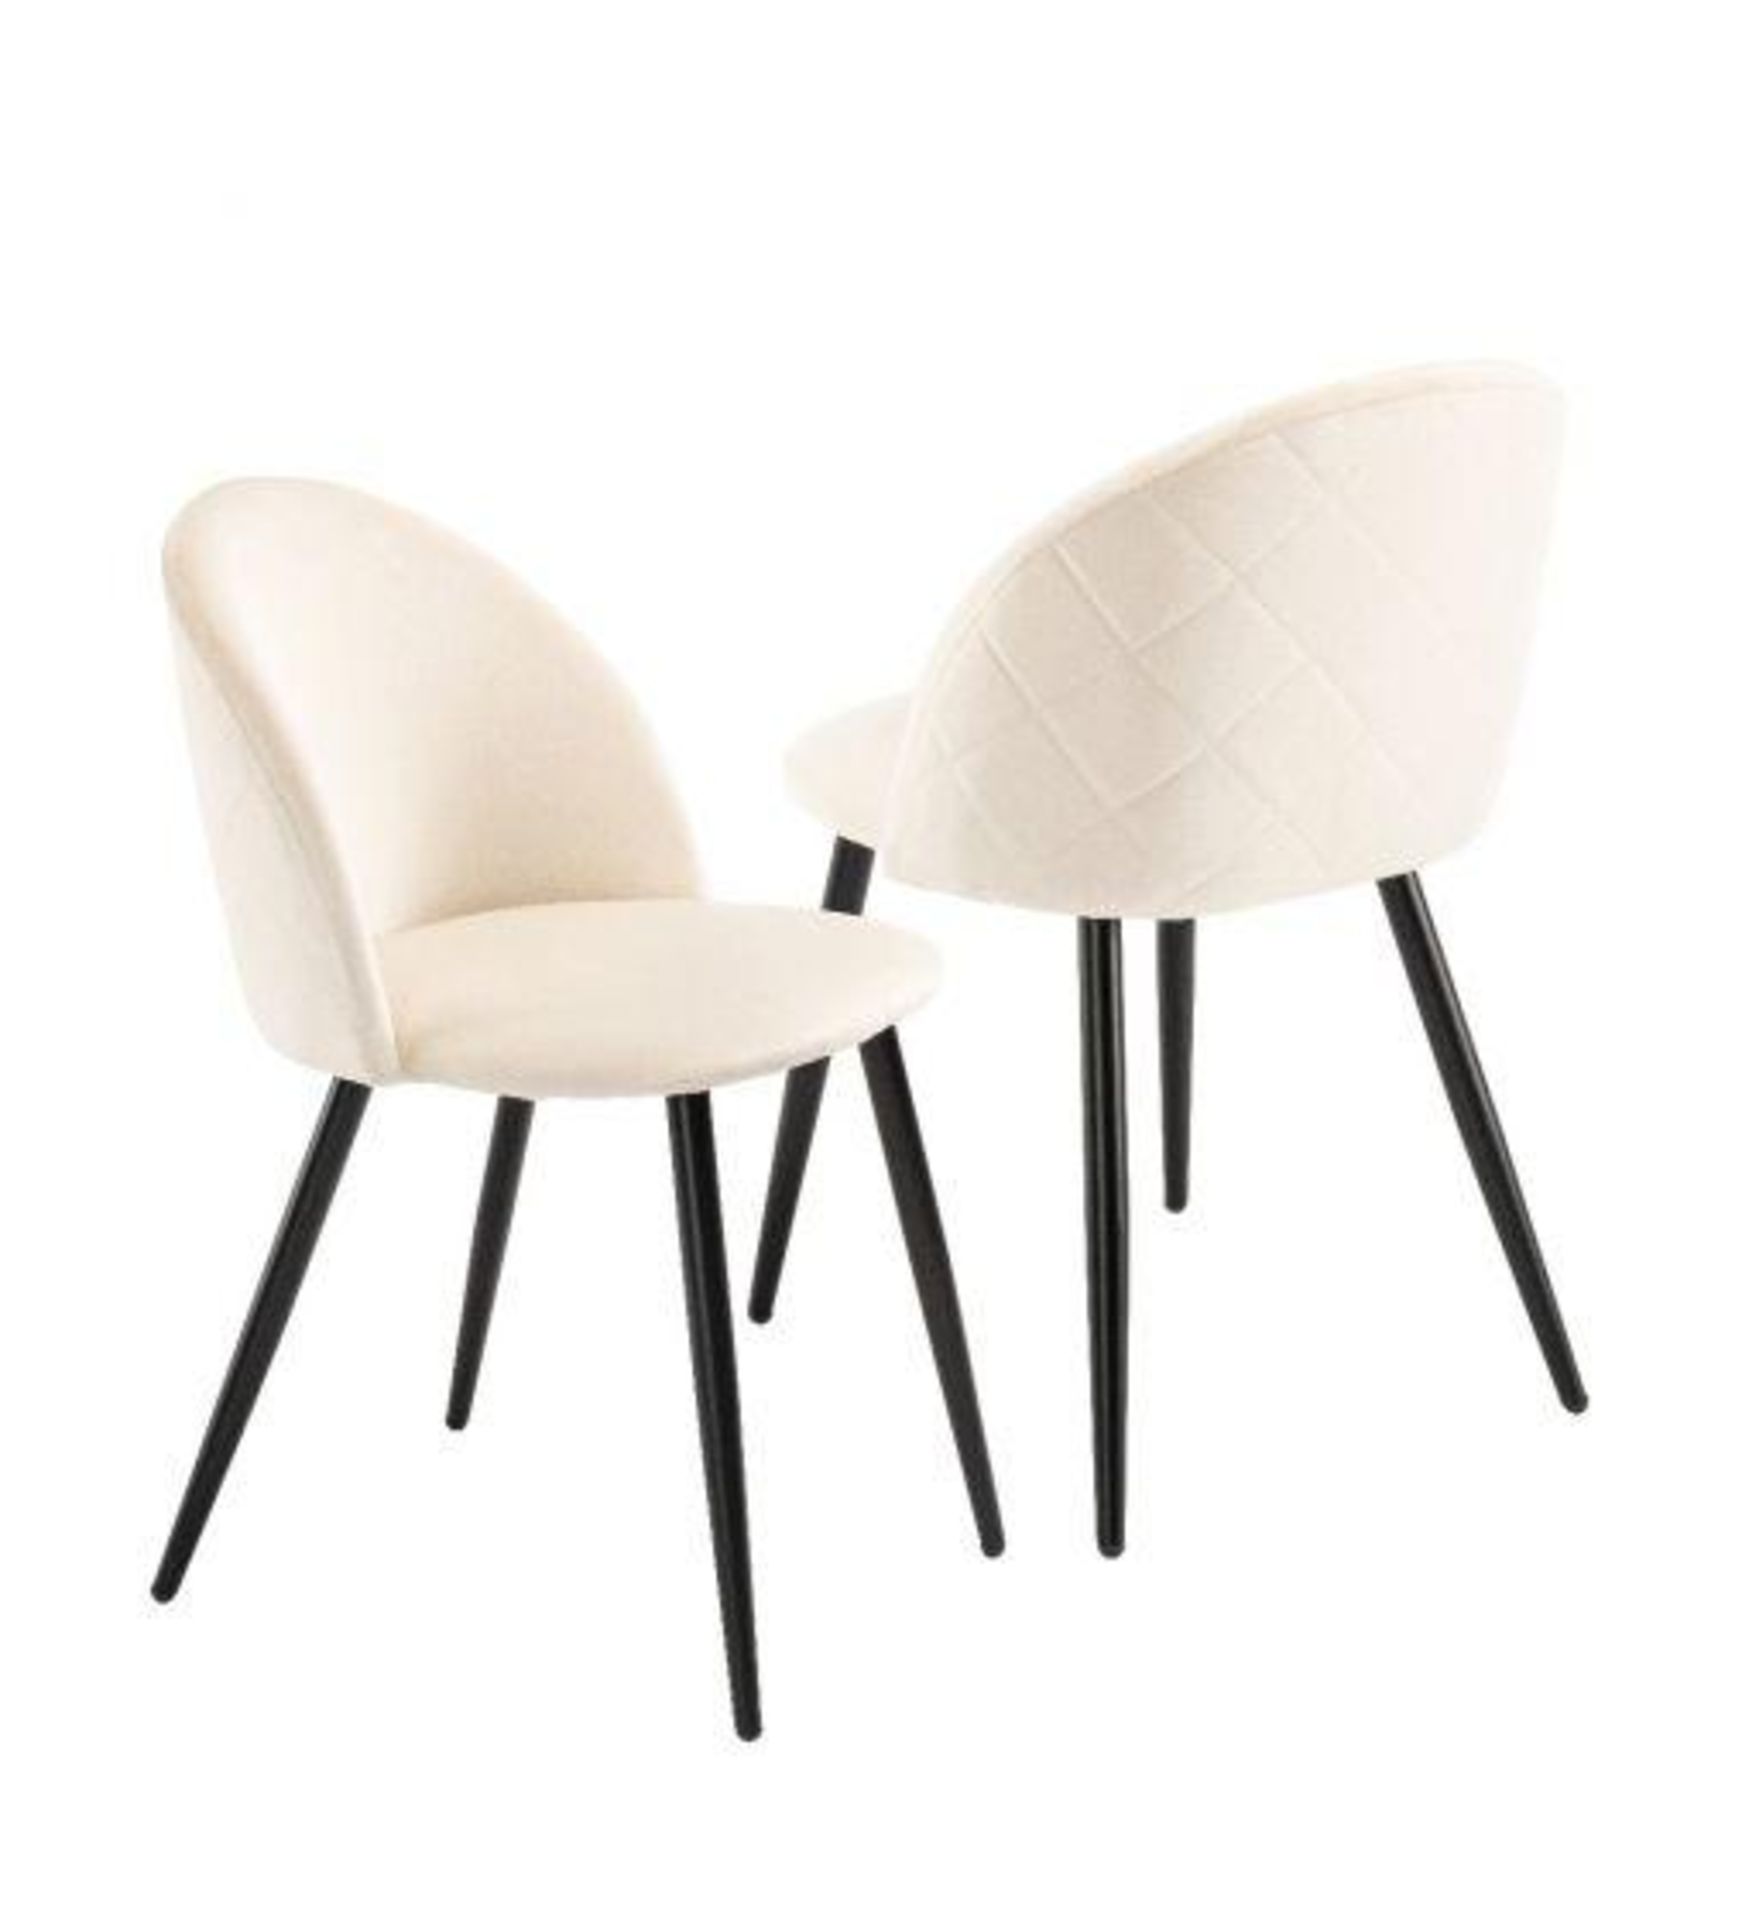 RRP £200 - Boxed 2 'Lotus' White Dining Chairs